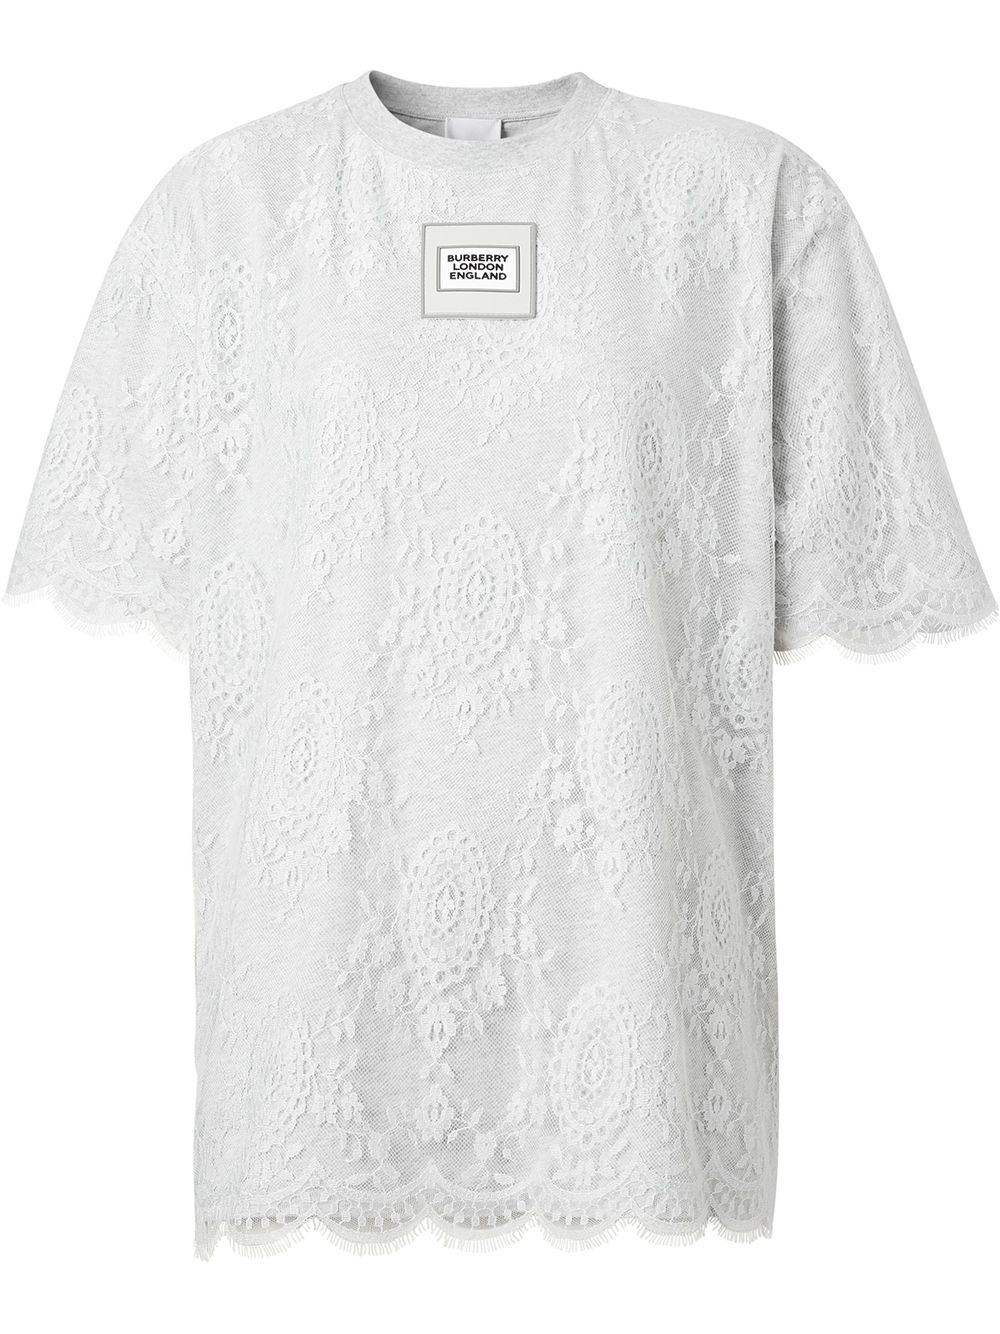 BURBERRY LACE OVERLAY T-SHIRT